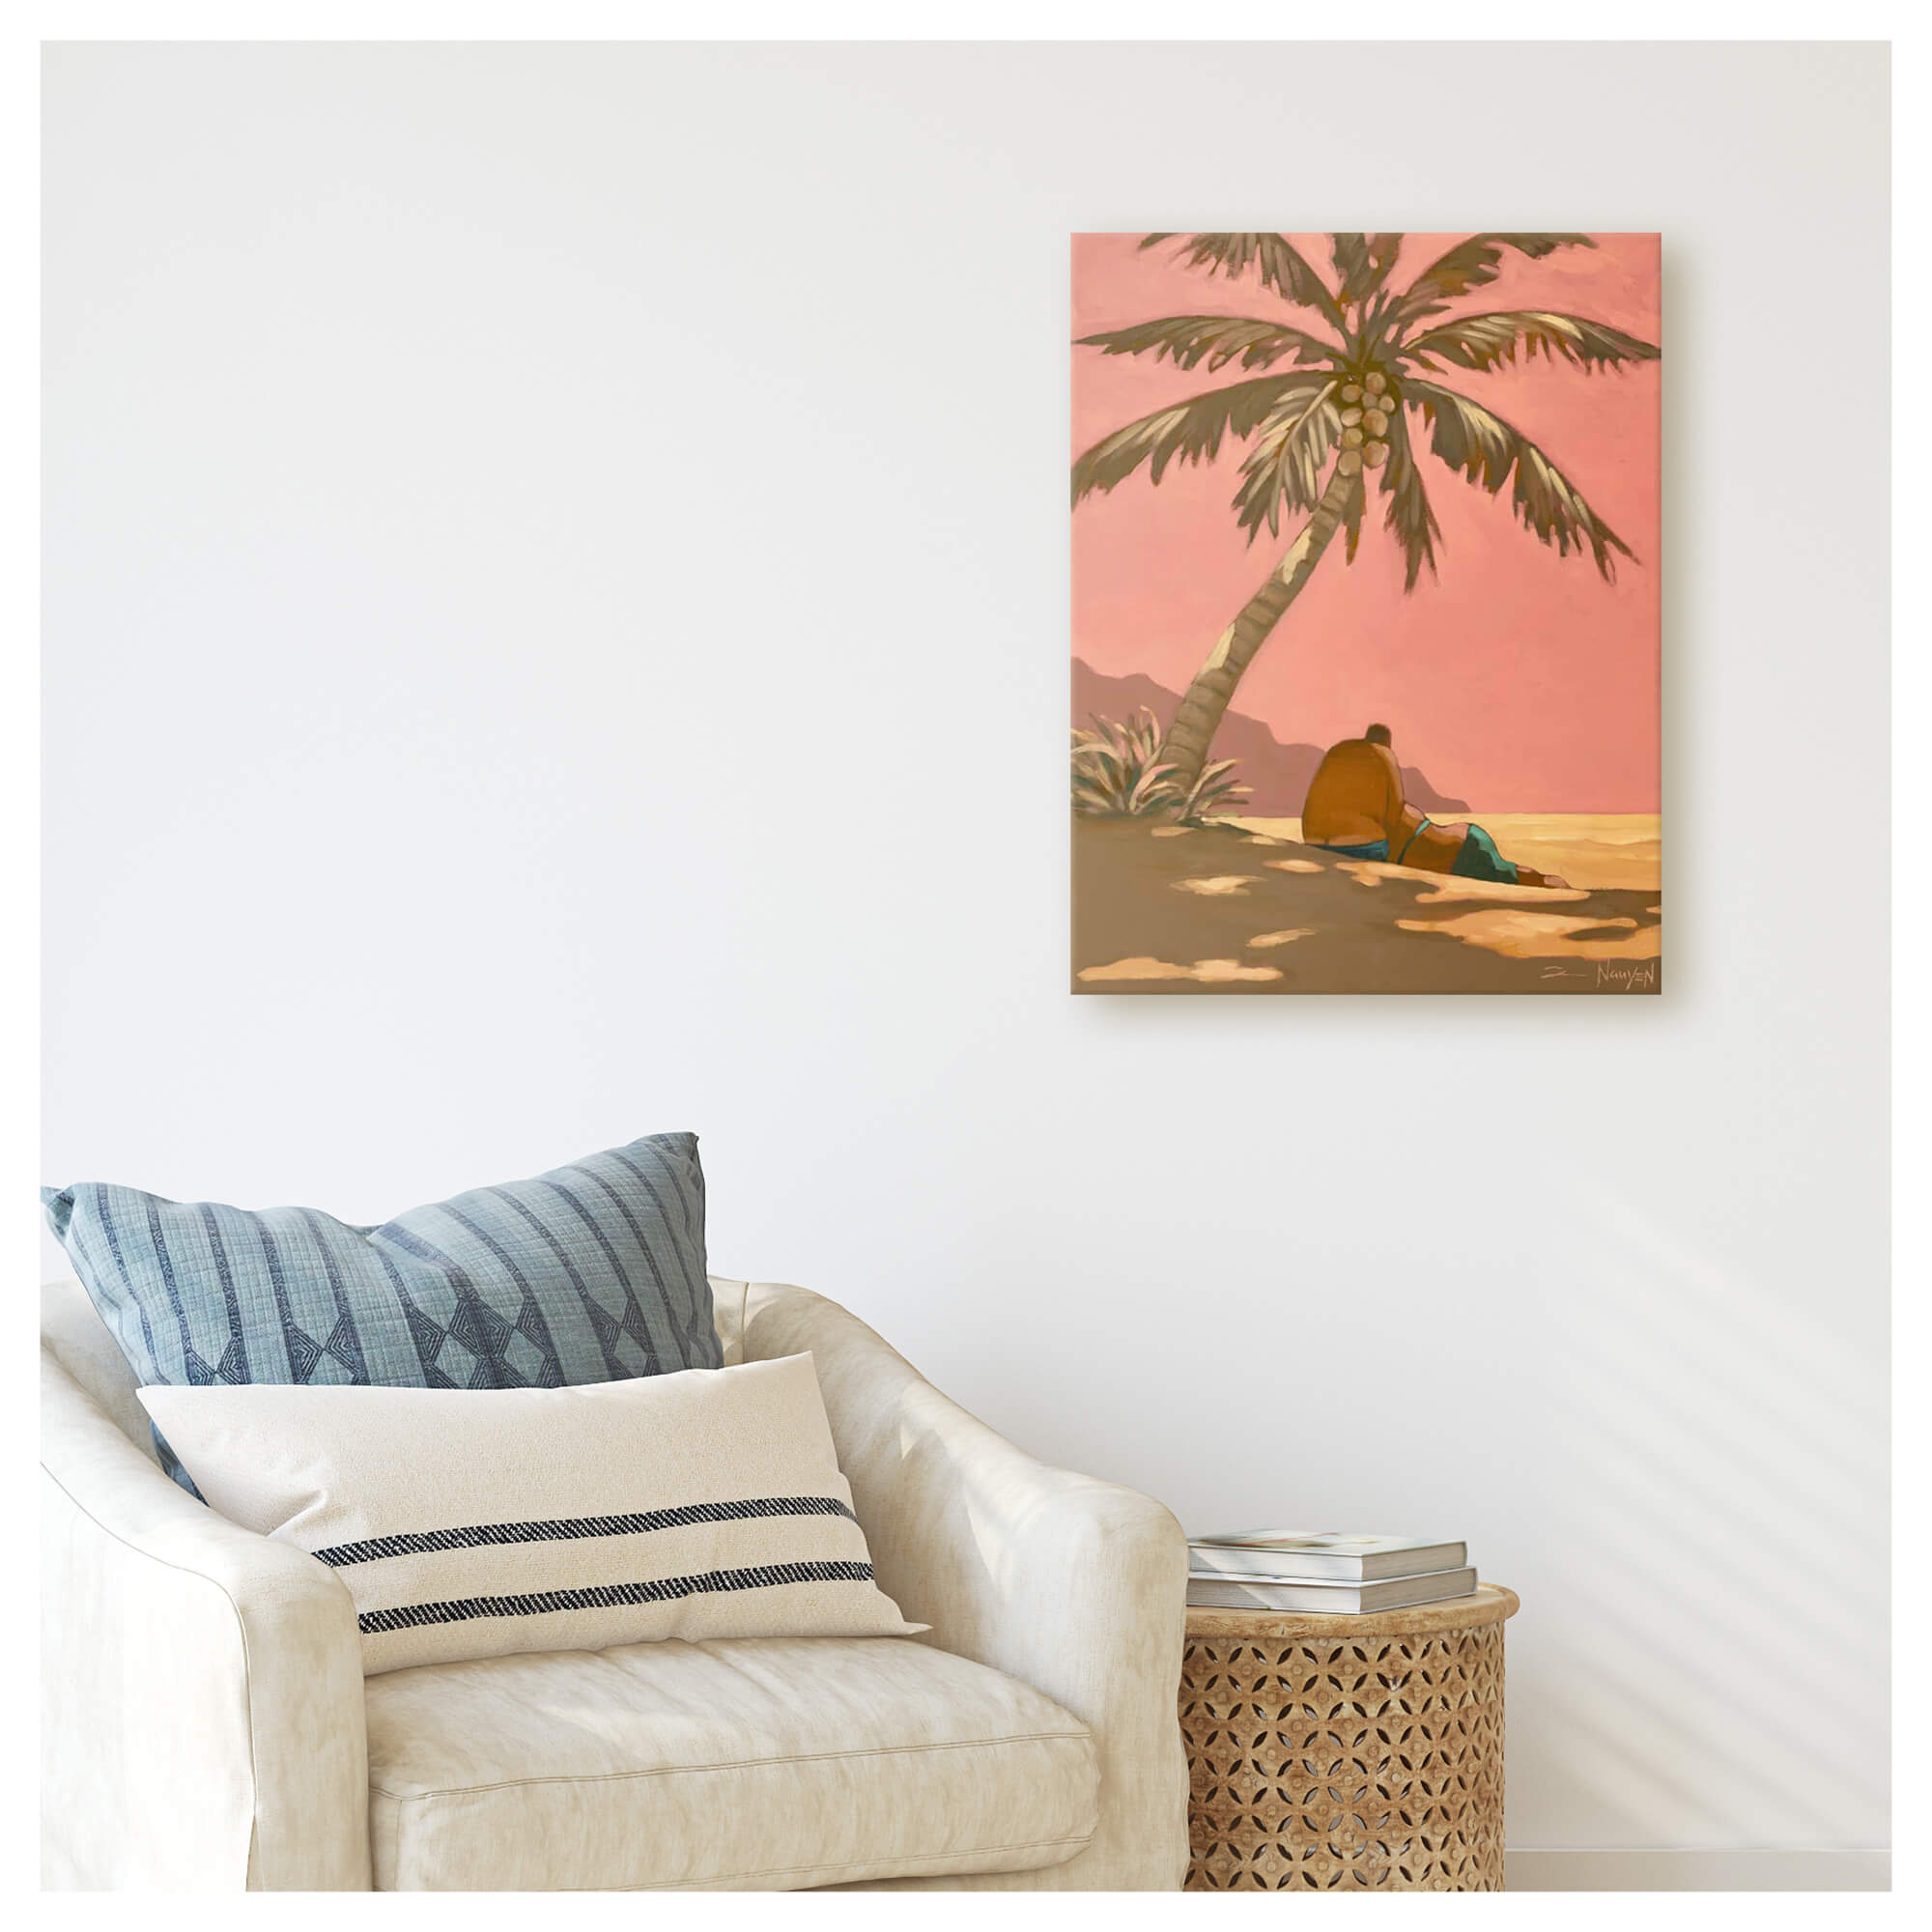 A canvas art print of a peaceful moment showing Hawaiian man and woman on the beach under a coconut tree by Hawaii artist Tim Nguyen